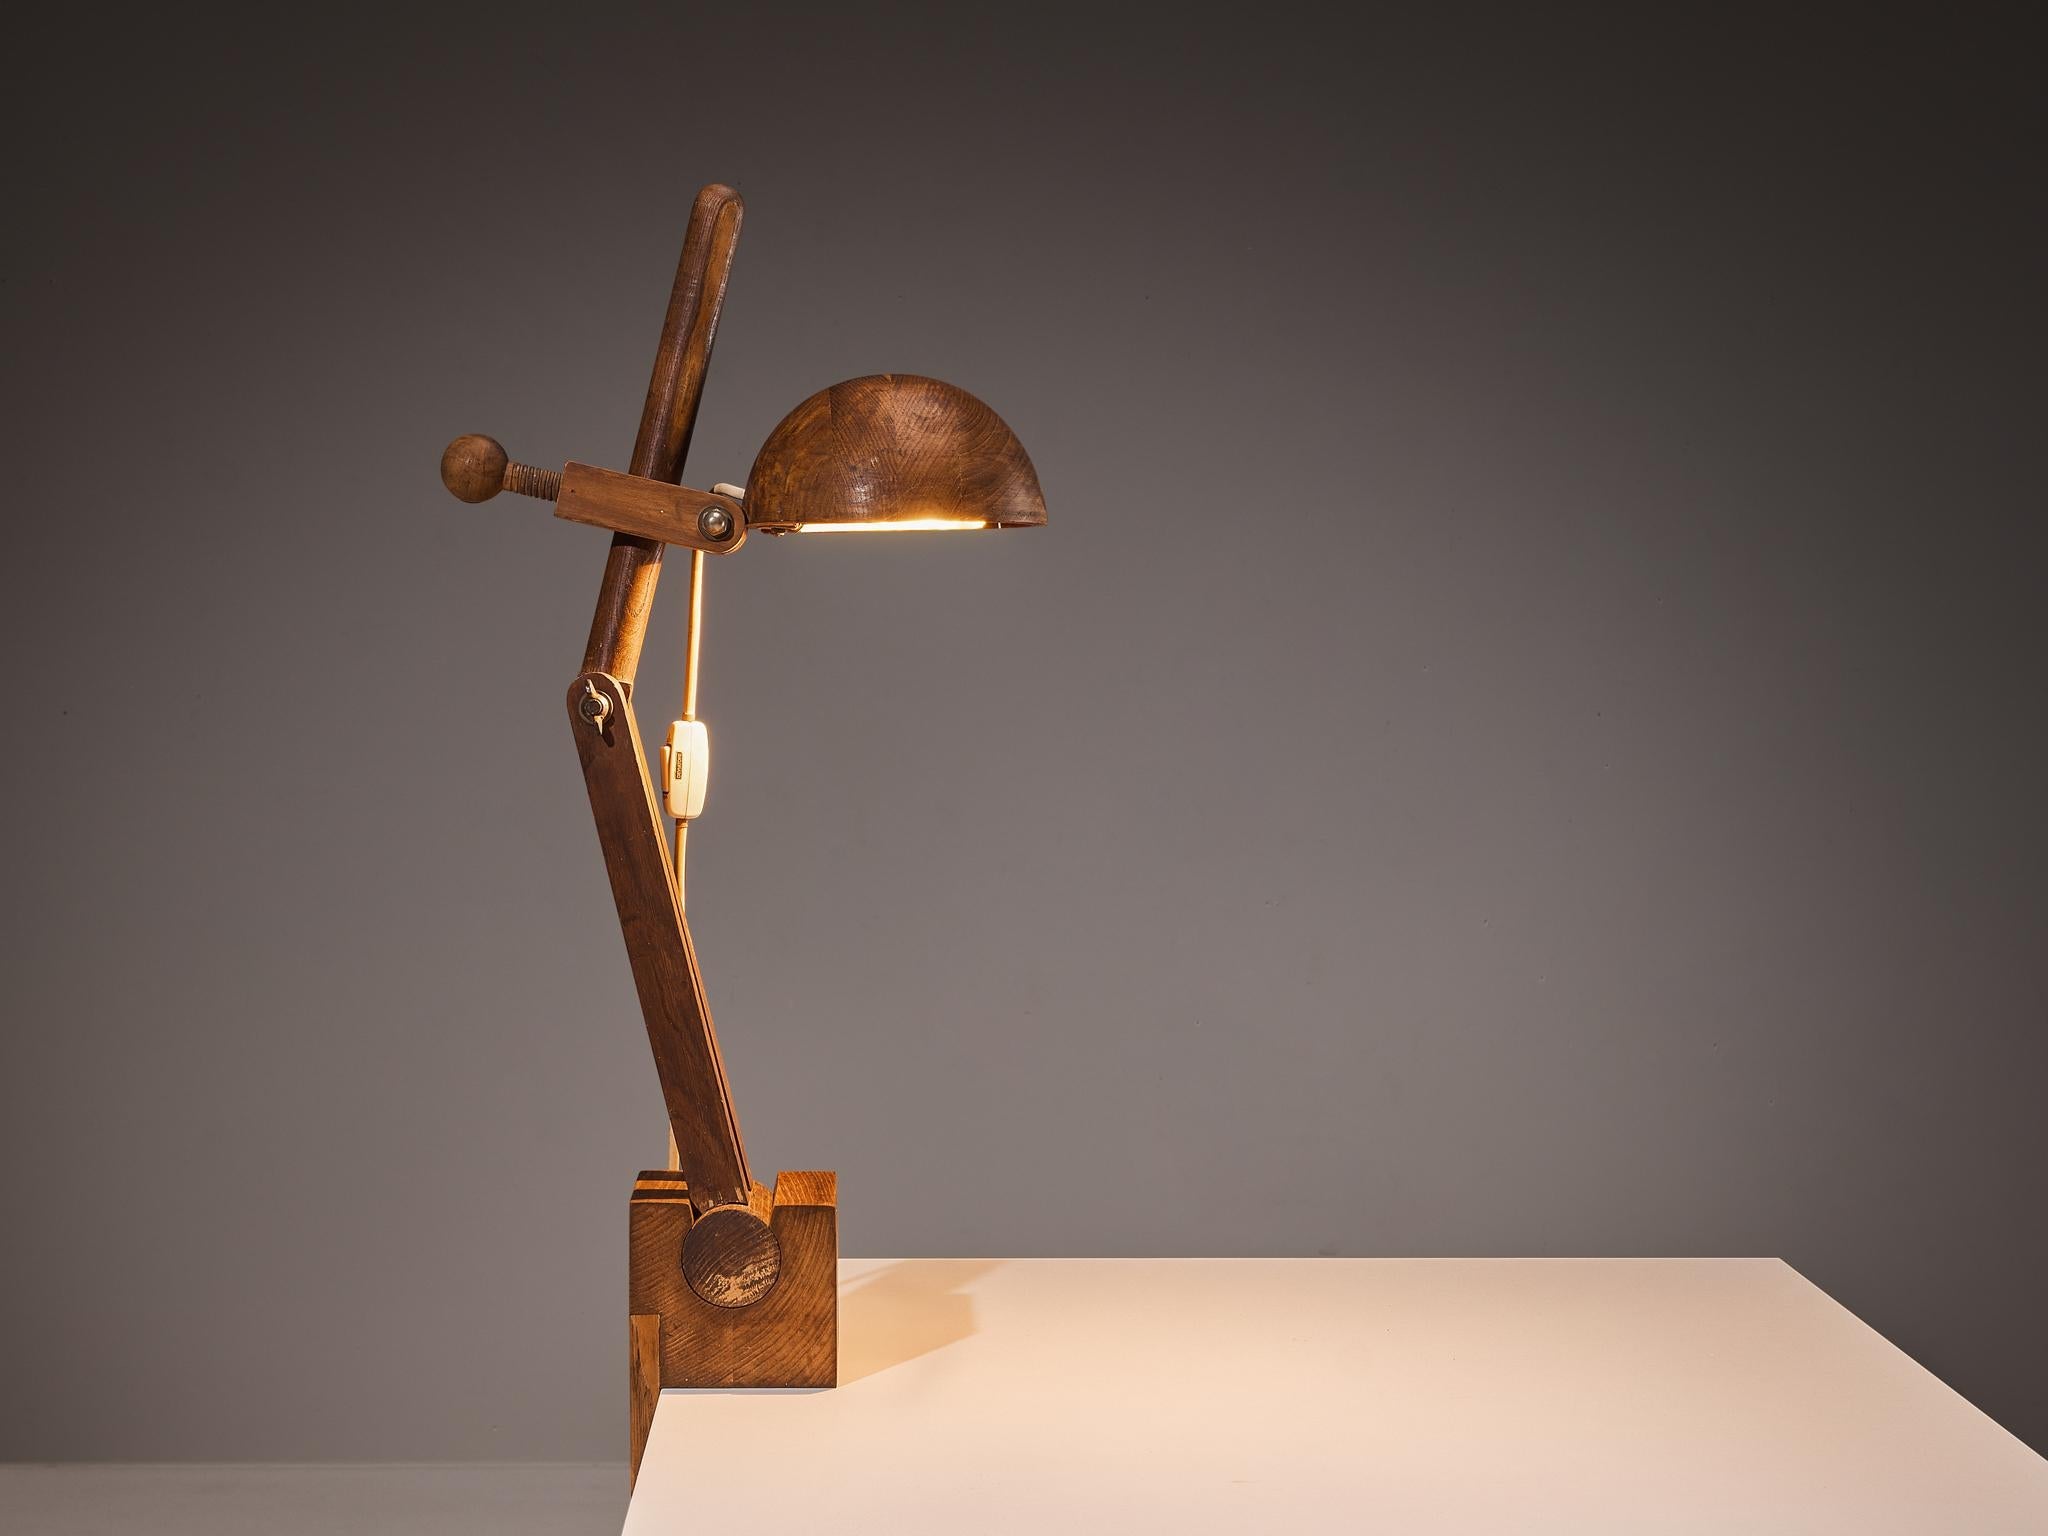 Paolo Pallucco Playful Table Clamp Lamp in Solid Chestnut